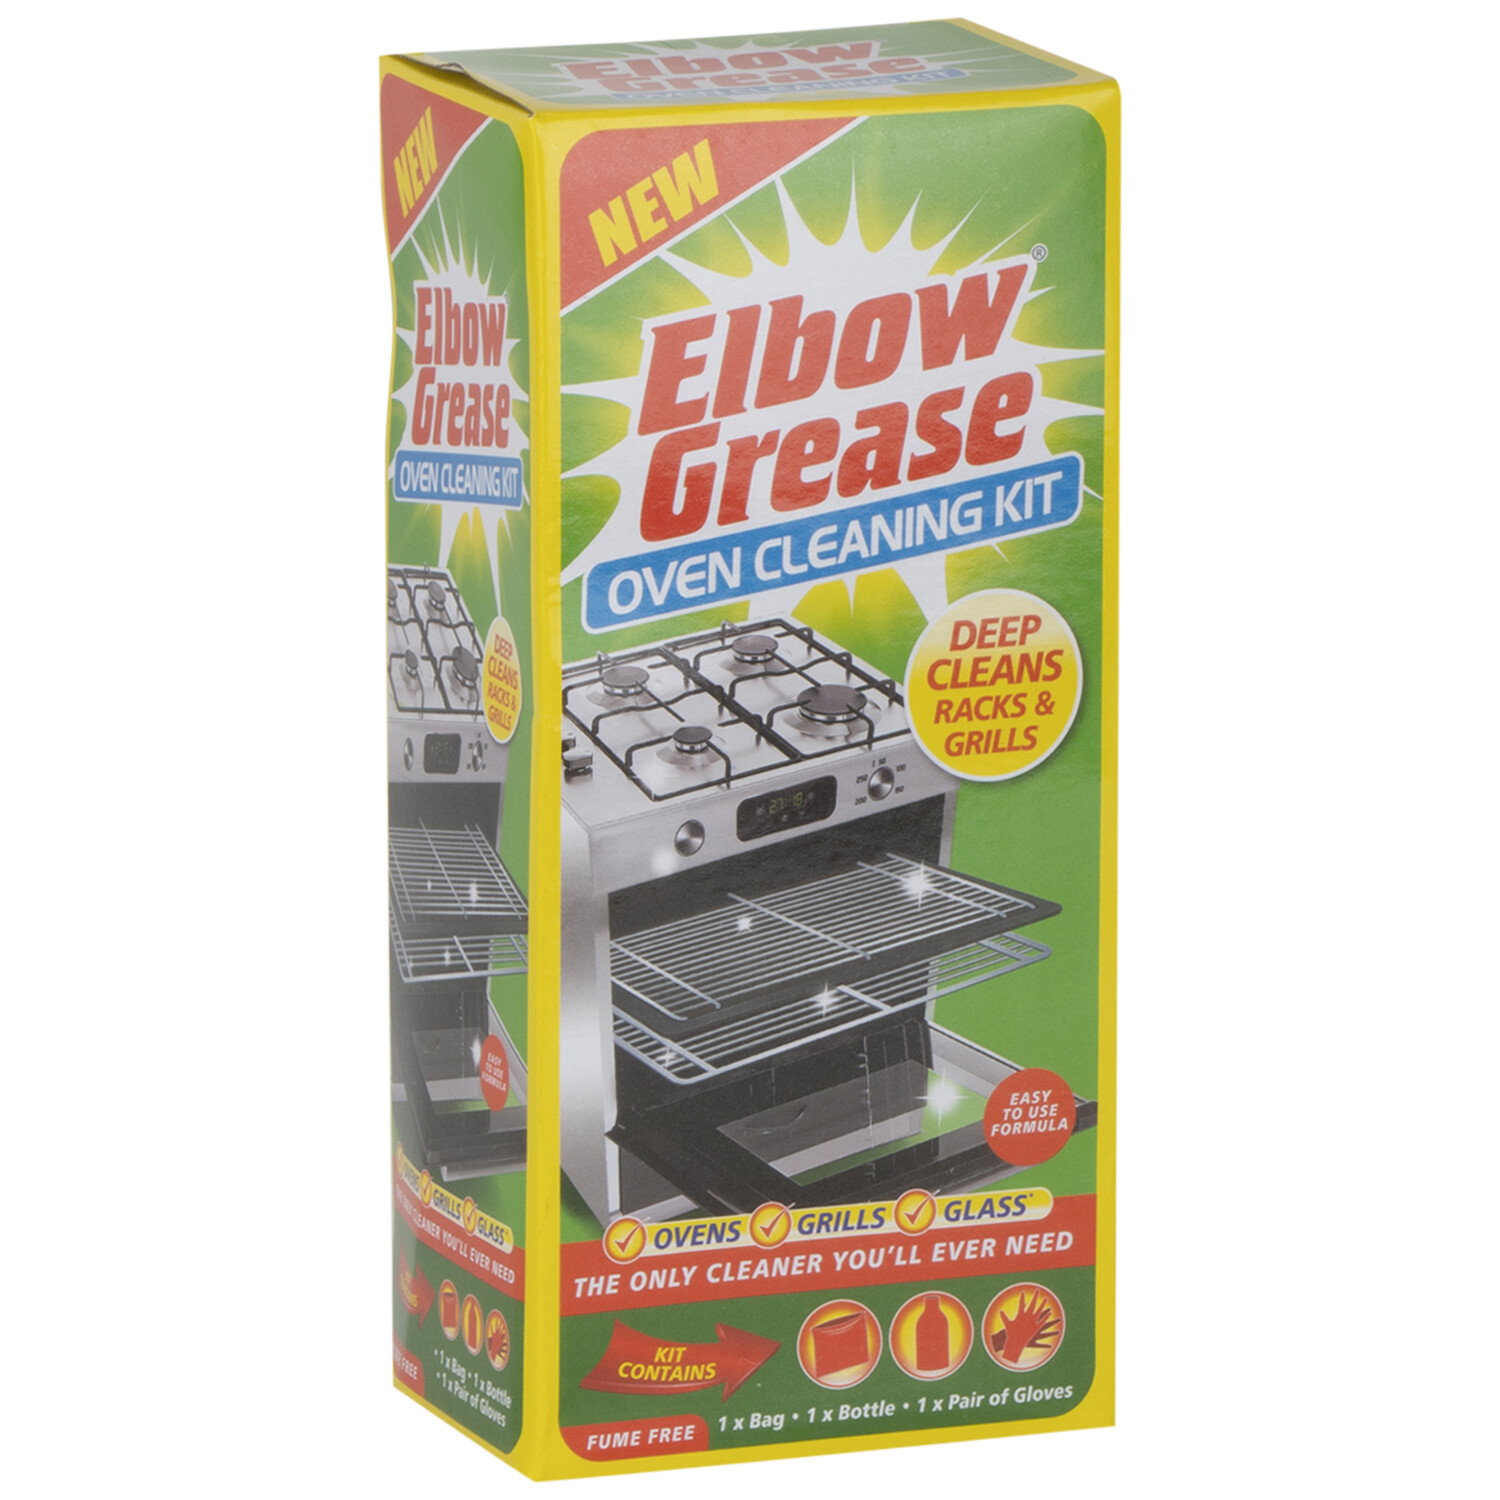 Elbow Grease Oven Cleaning Kit Image